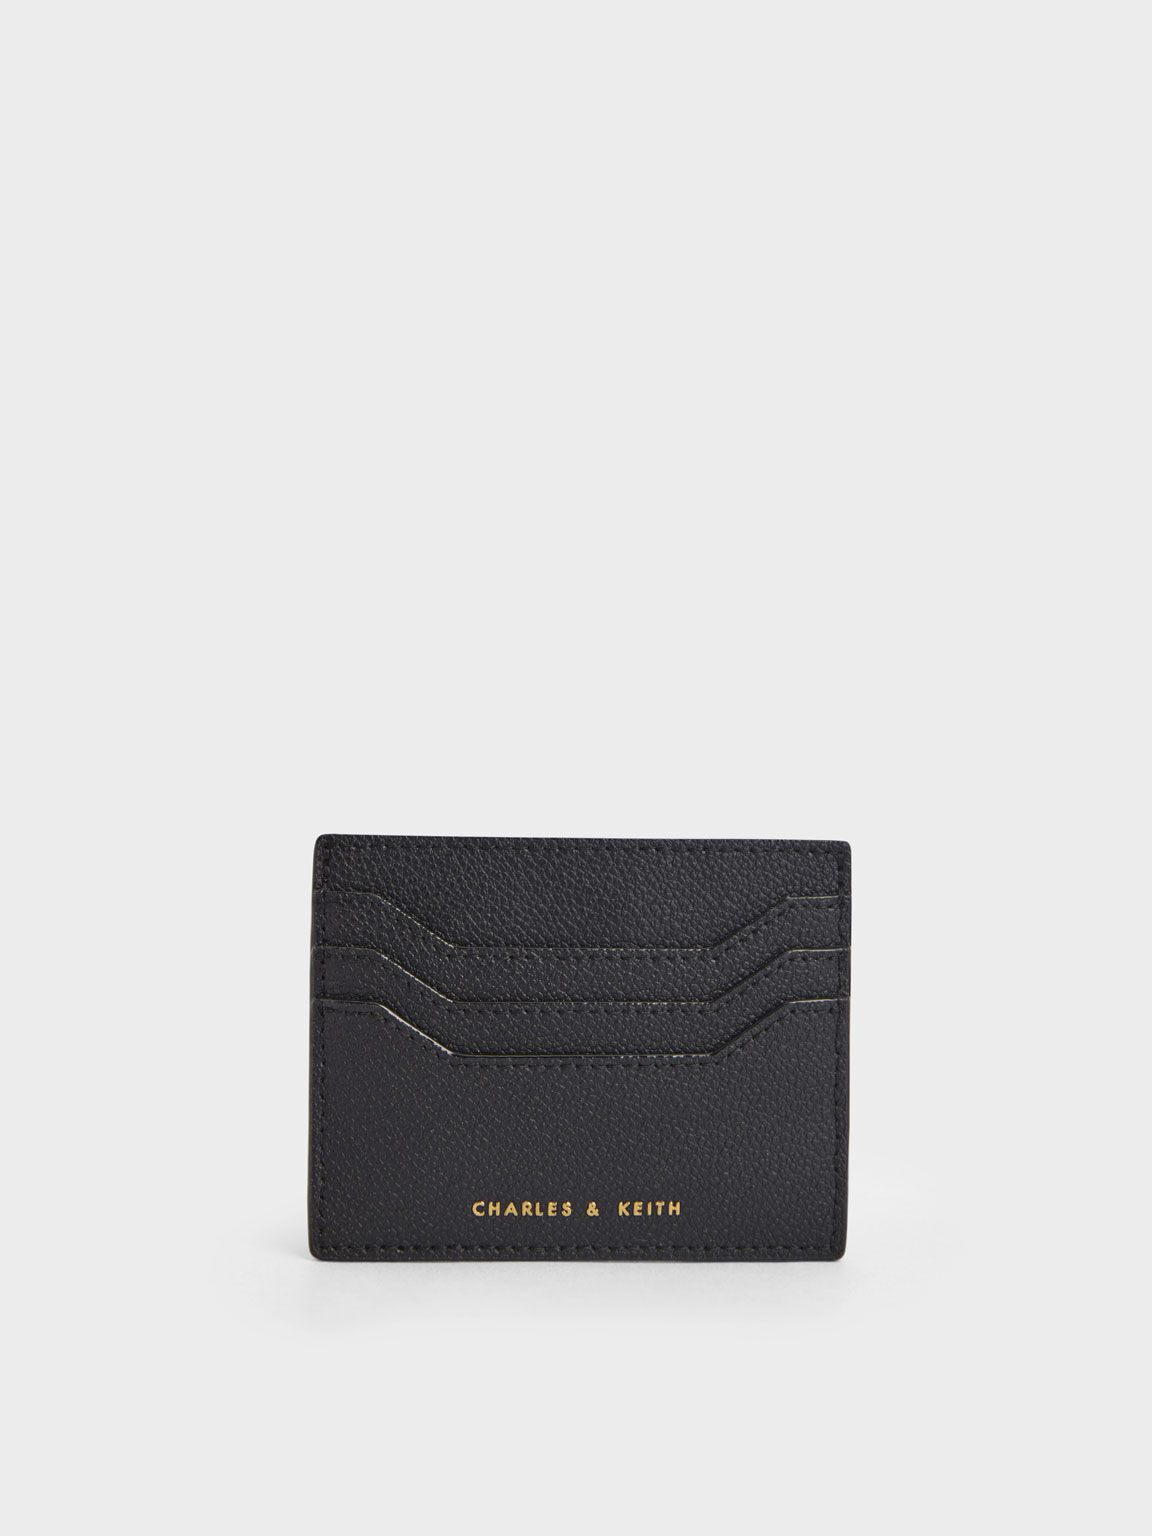 Women's Card Holders | Shop Online | CHARLES & KEITH TH